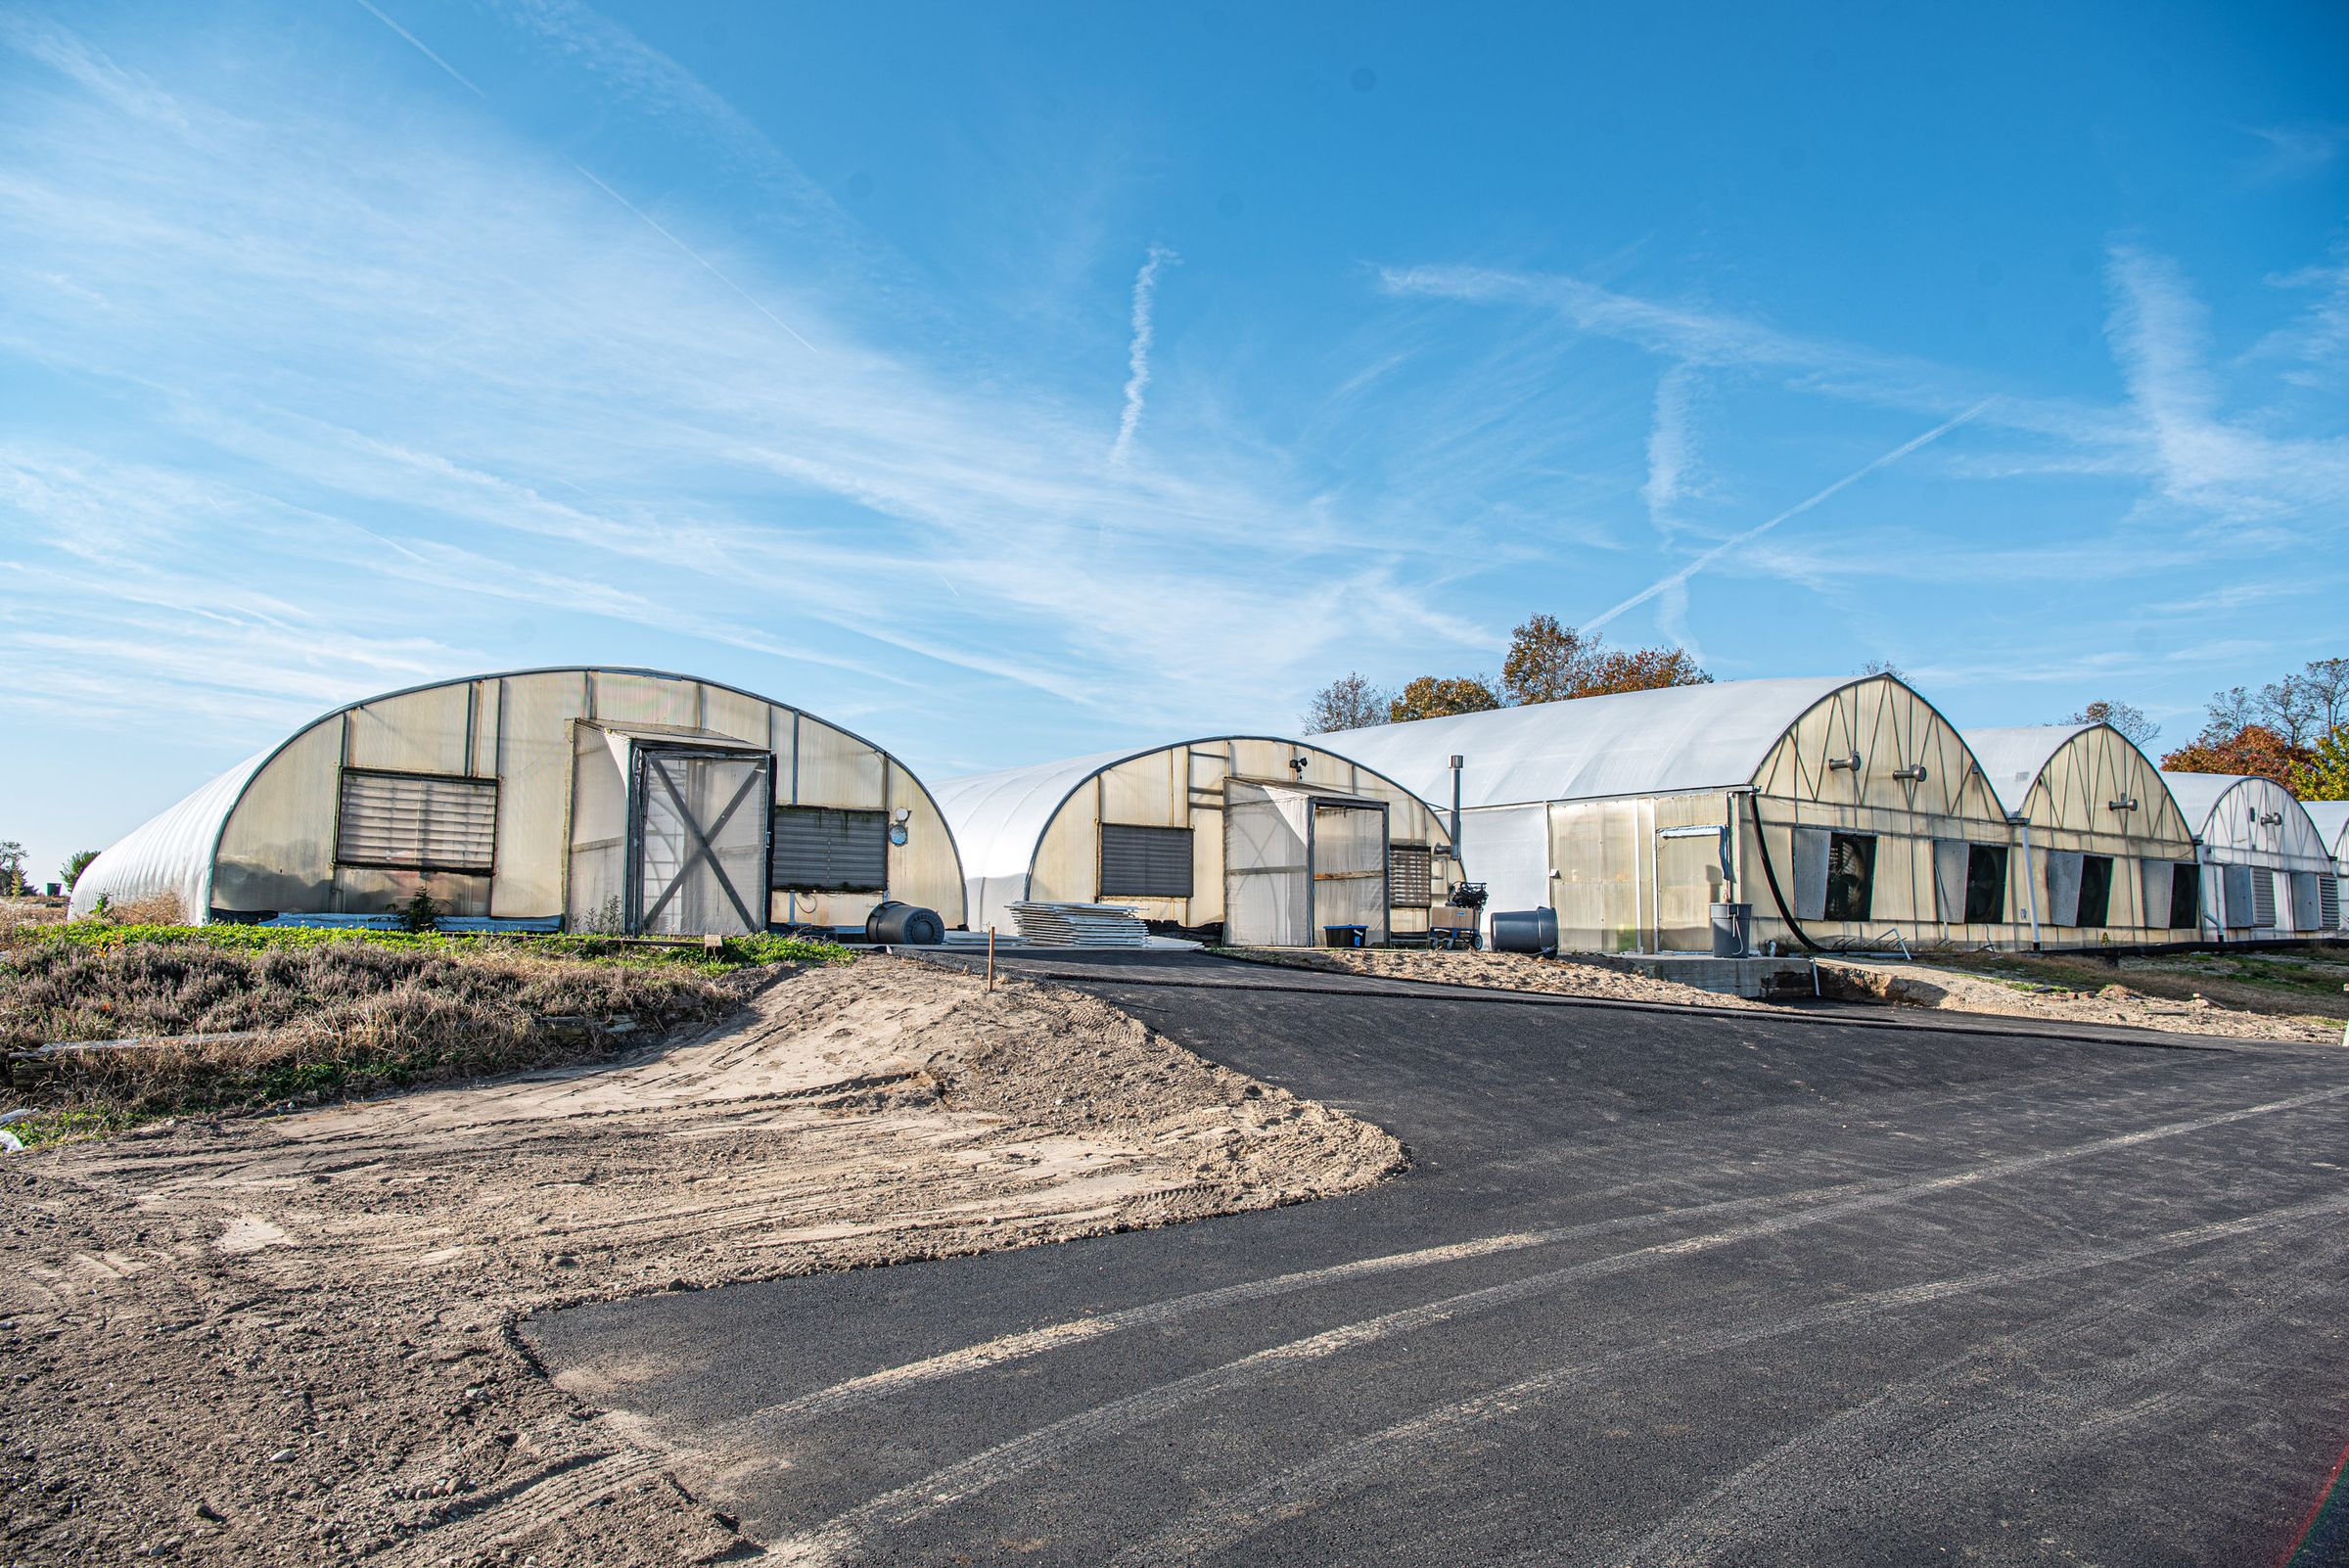 Several greenhouses arranged closely together, with a dark paved road leading towards them. The greenhouses are set against a backdrop of a clear blue sky.